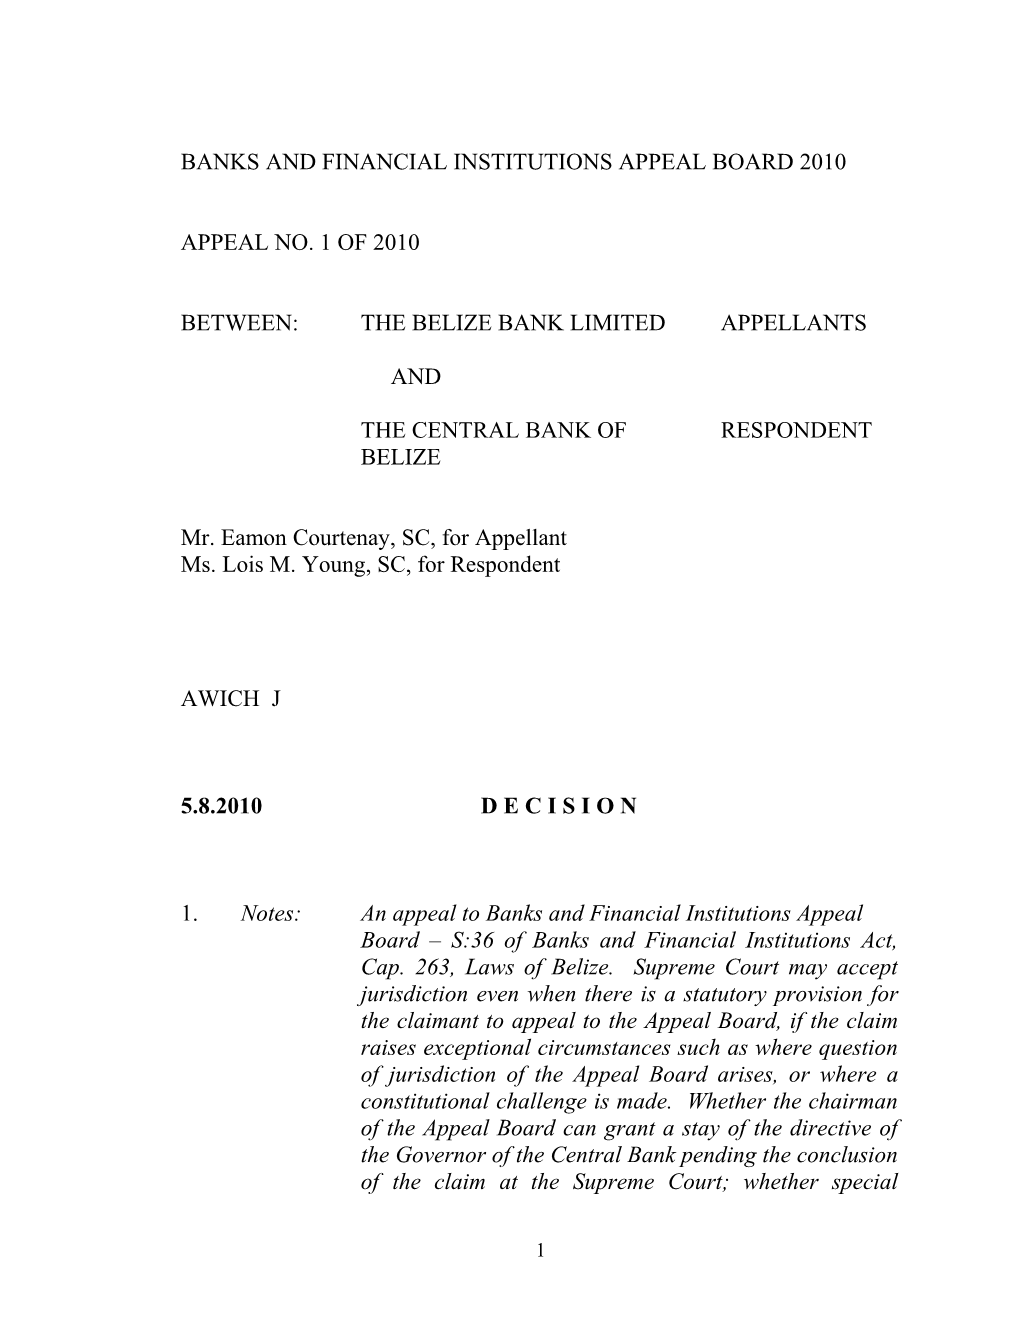 Banks and Financial Institutions Appeal Board 2010